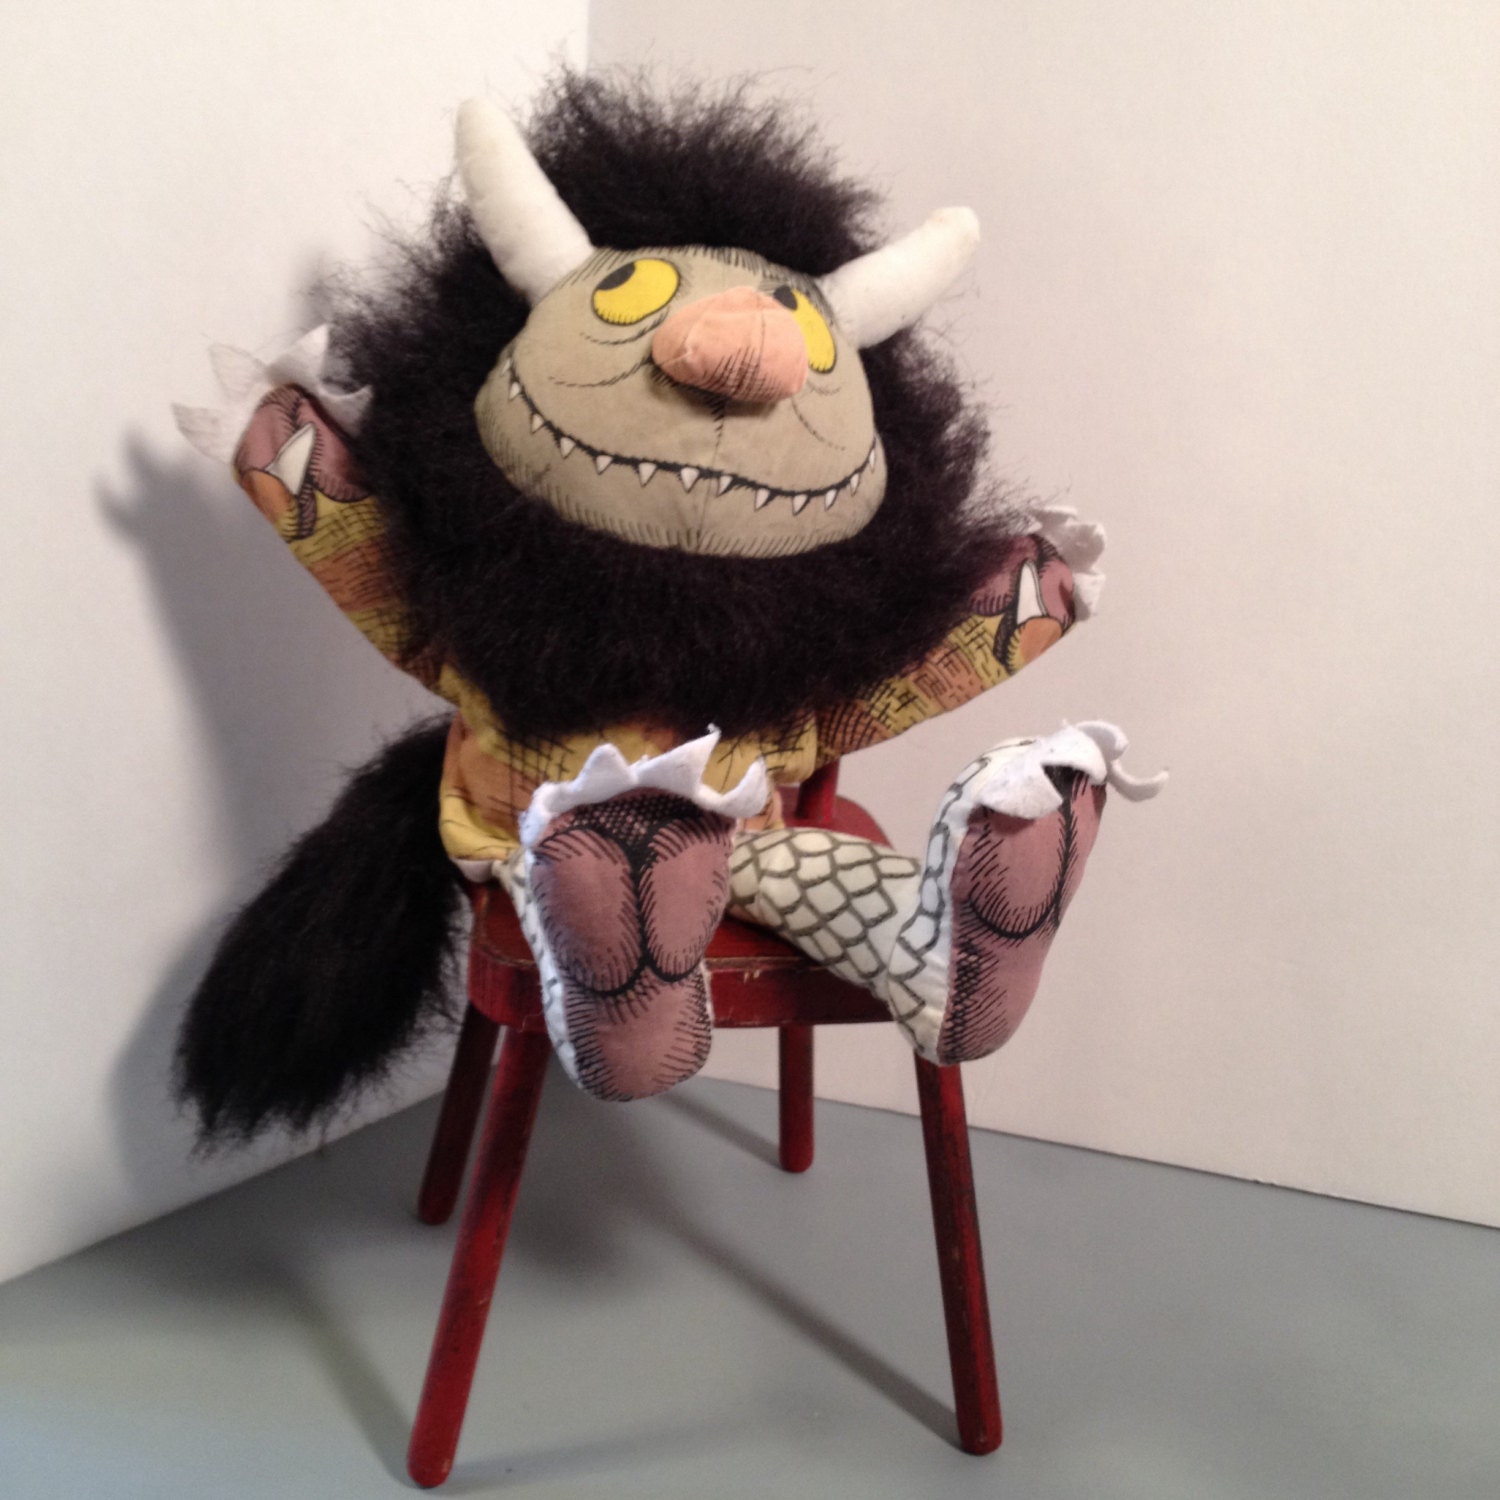 Where The Wild Things Are Plush Toys 99